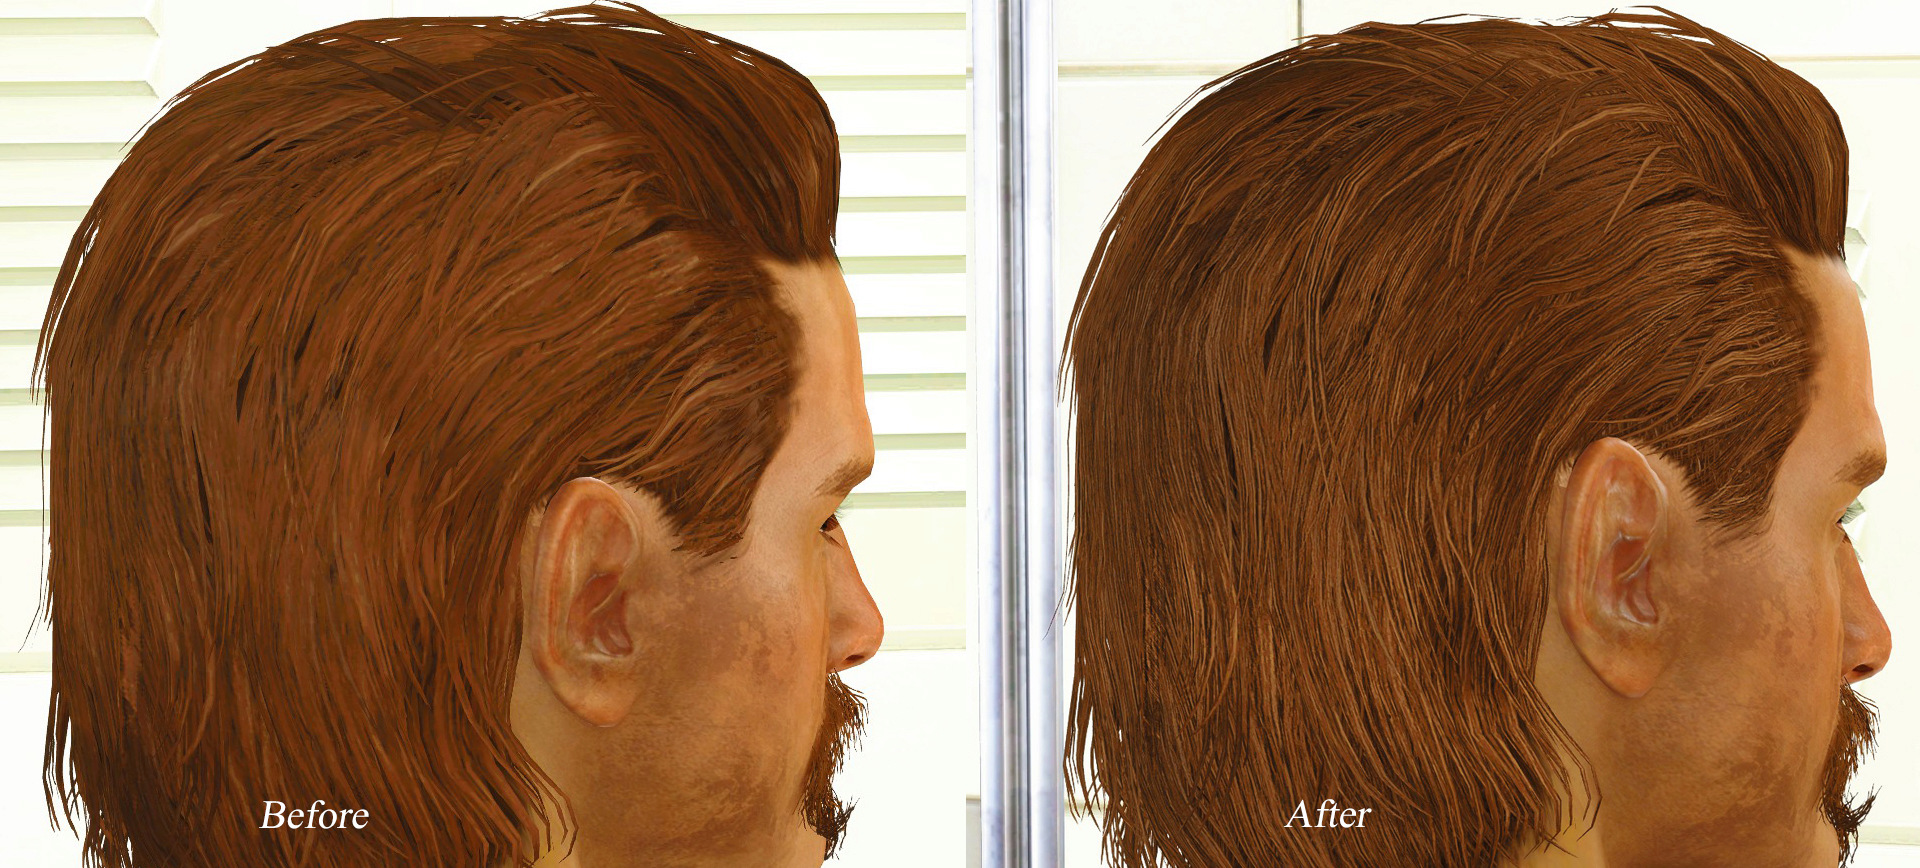 Lots more male hairstyles fallout 4 фото 116